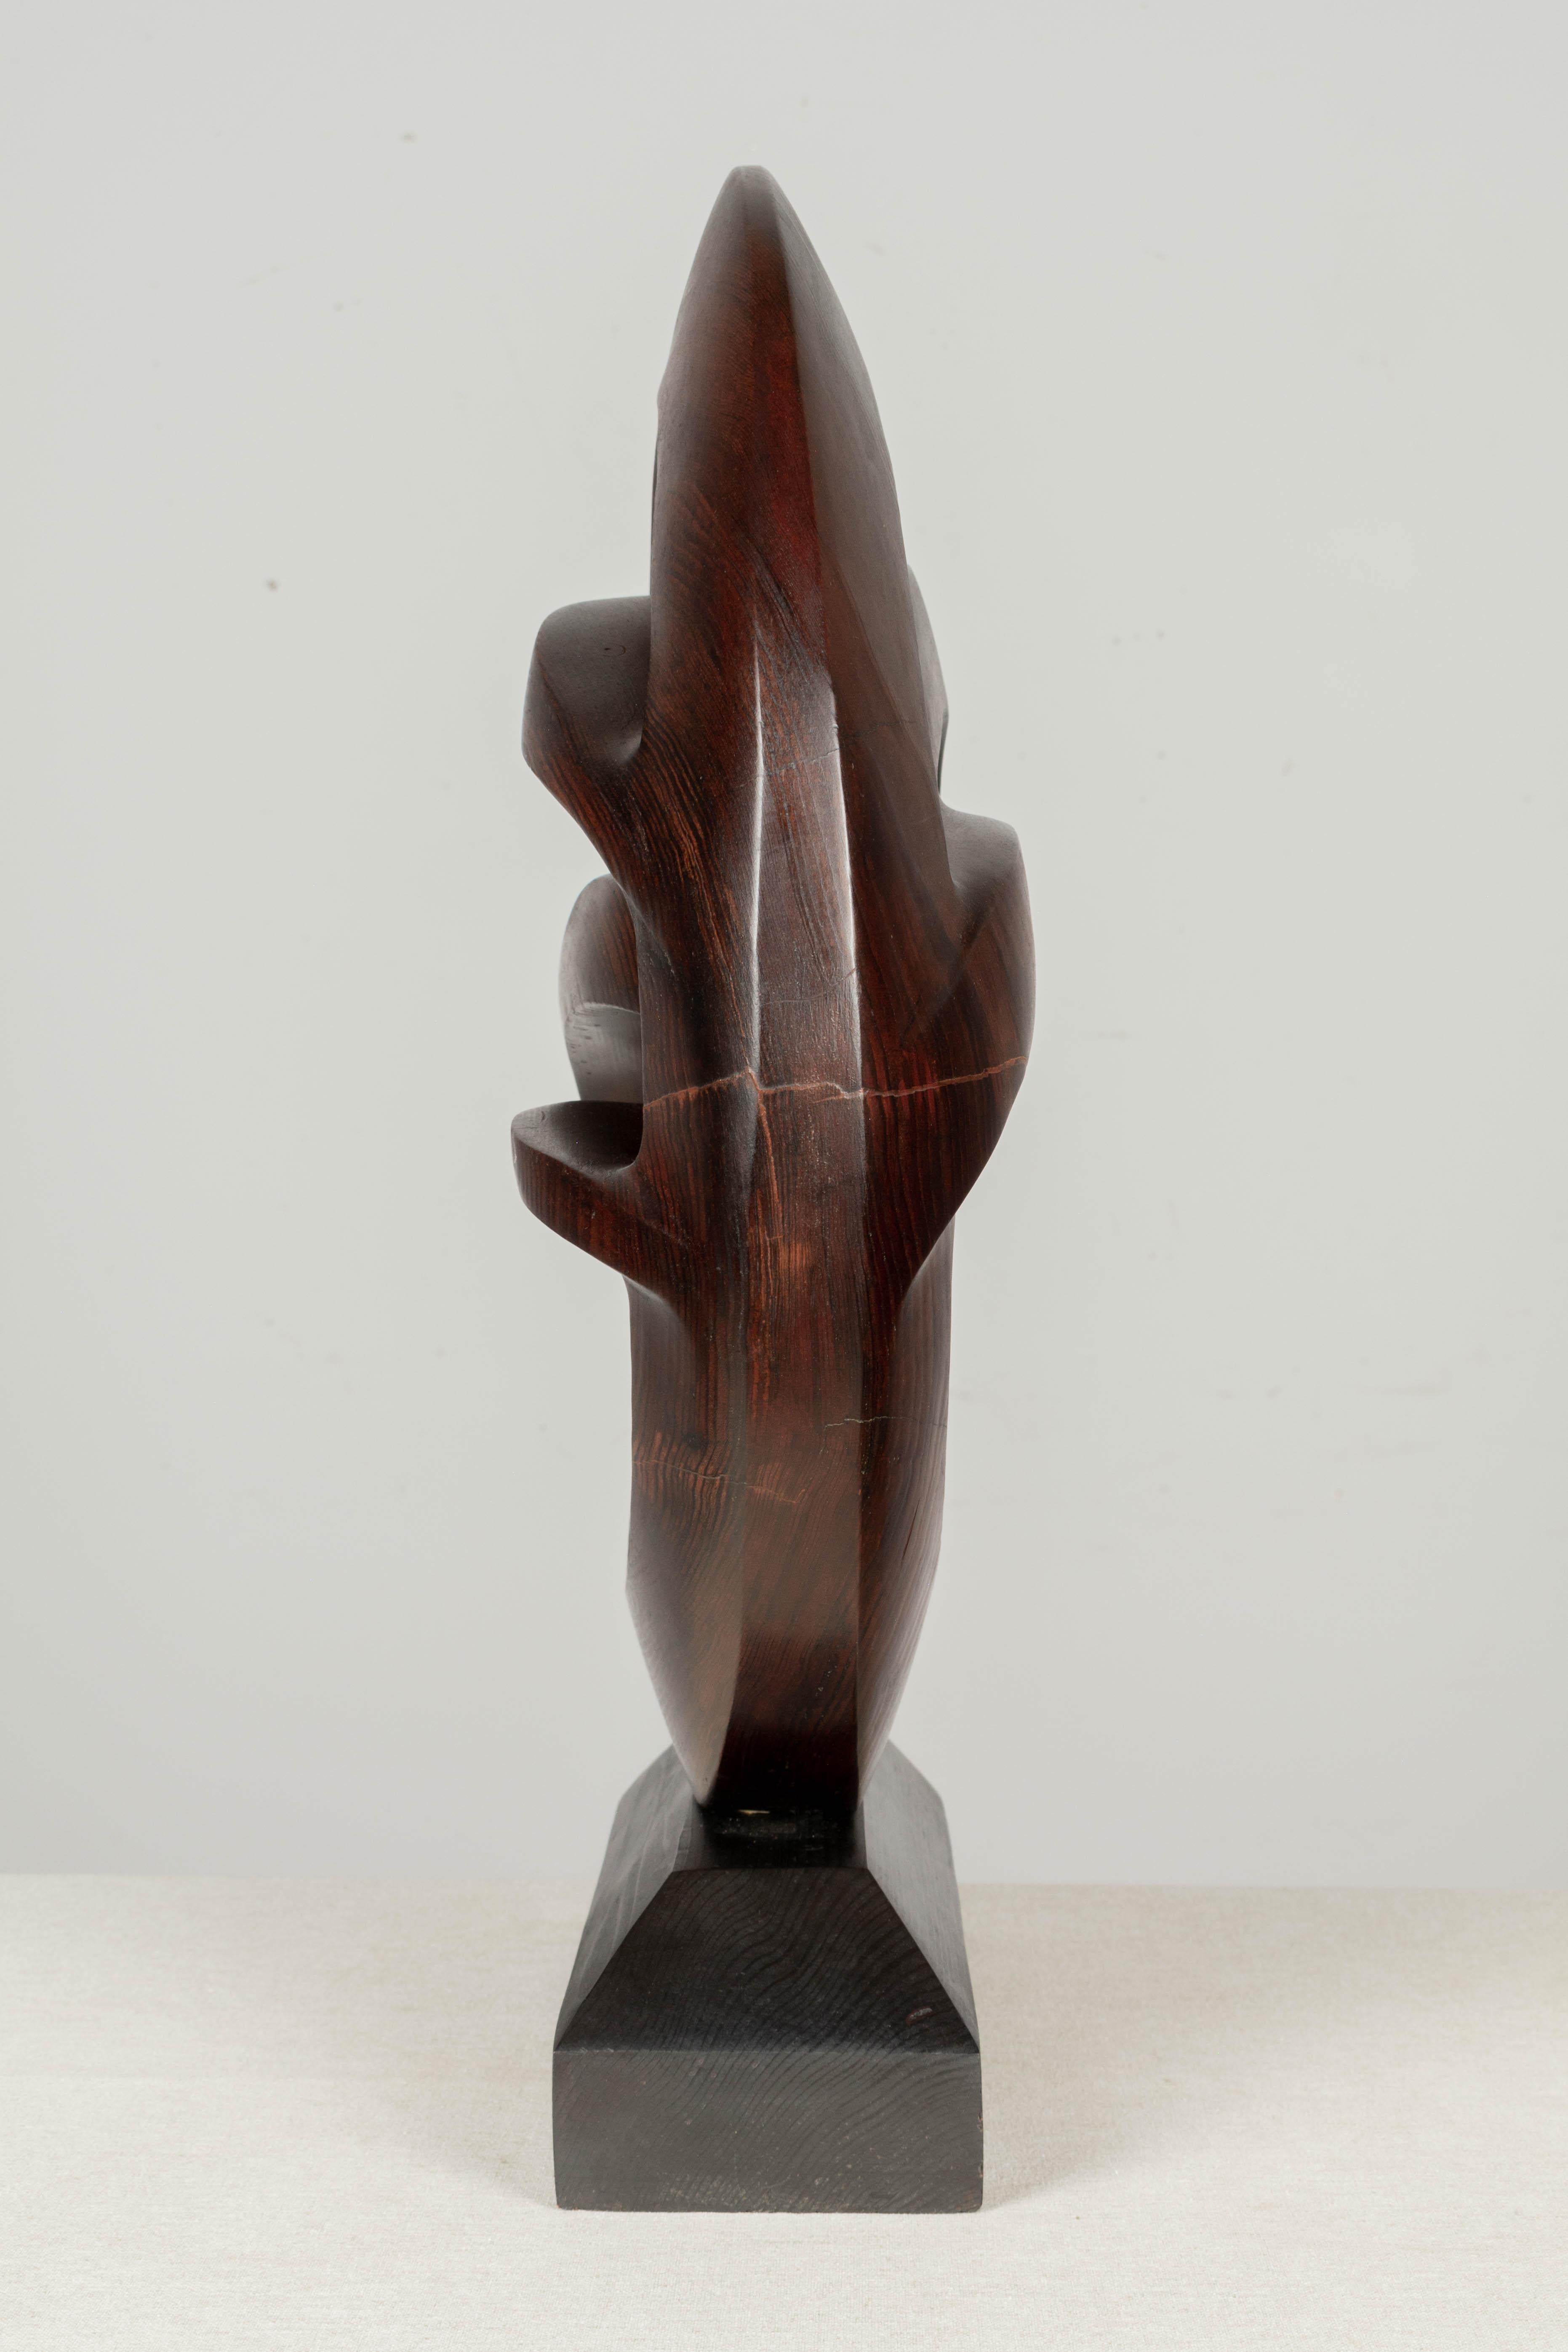 North American Abstract Wood Sculpture by Carol Setterlund